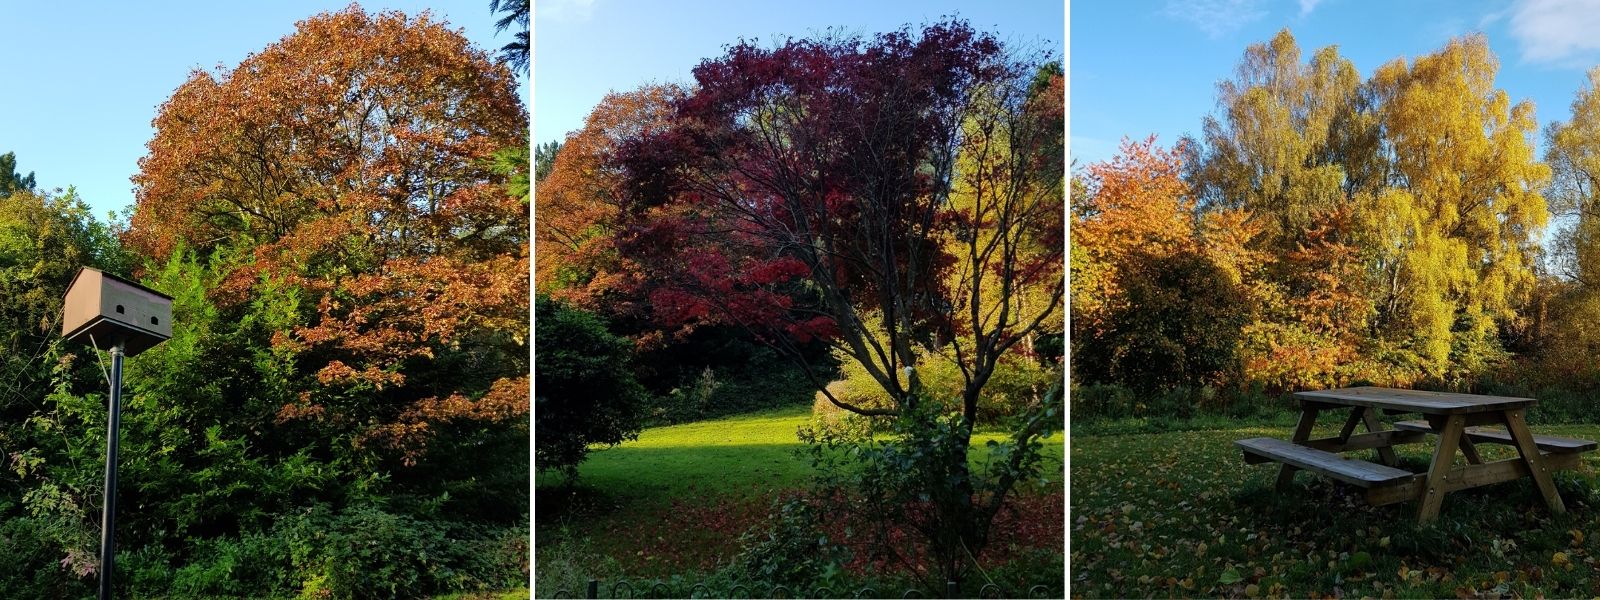 Block of 3 images featuring autumnal trees in a park